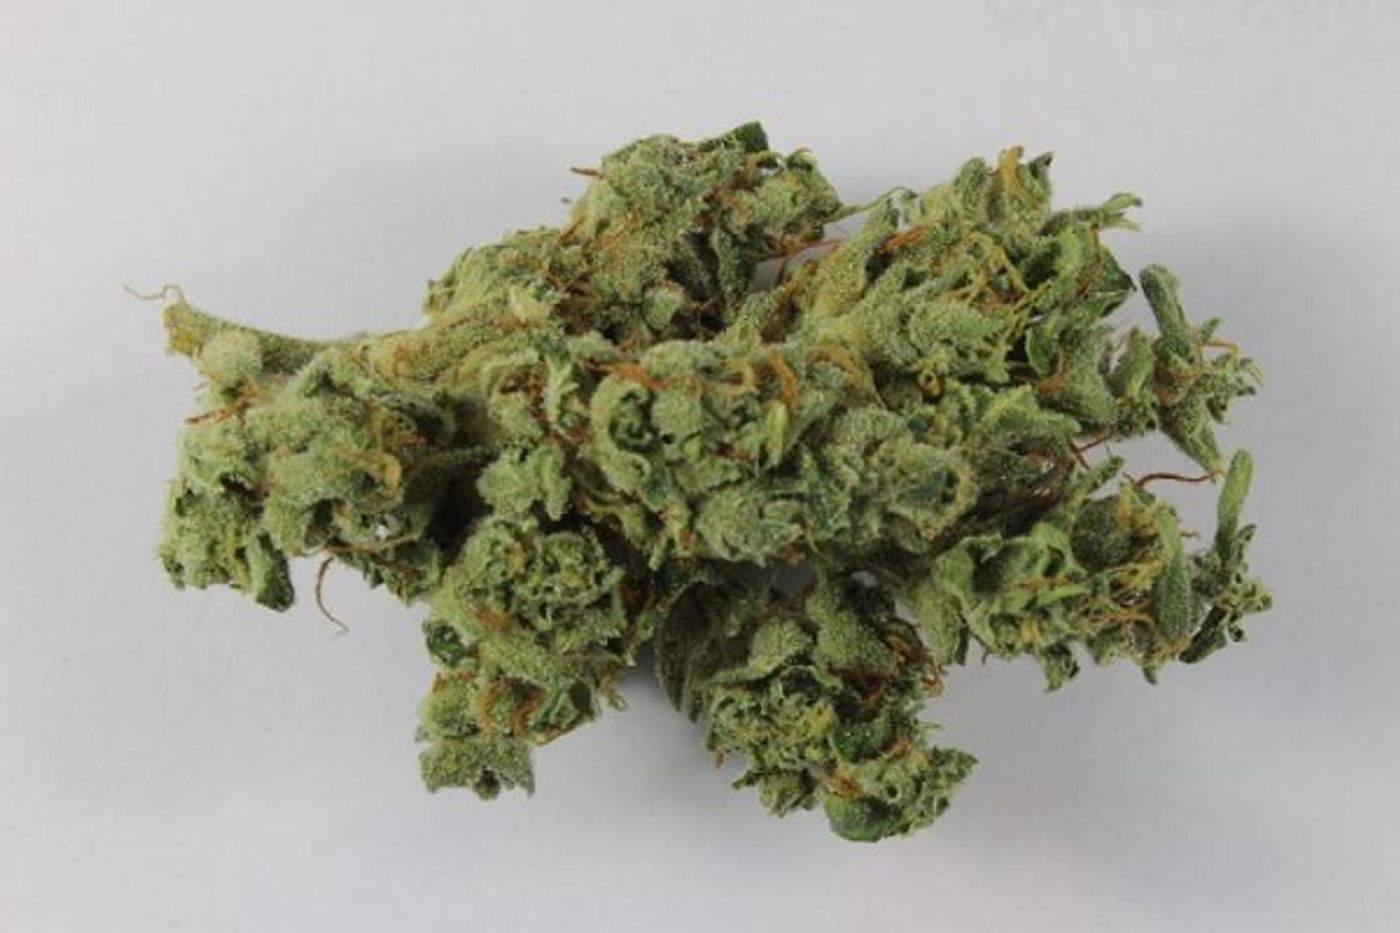 Marijuana buds are often two to three times as potent as they were 30 years ago.